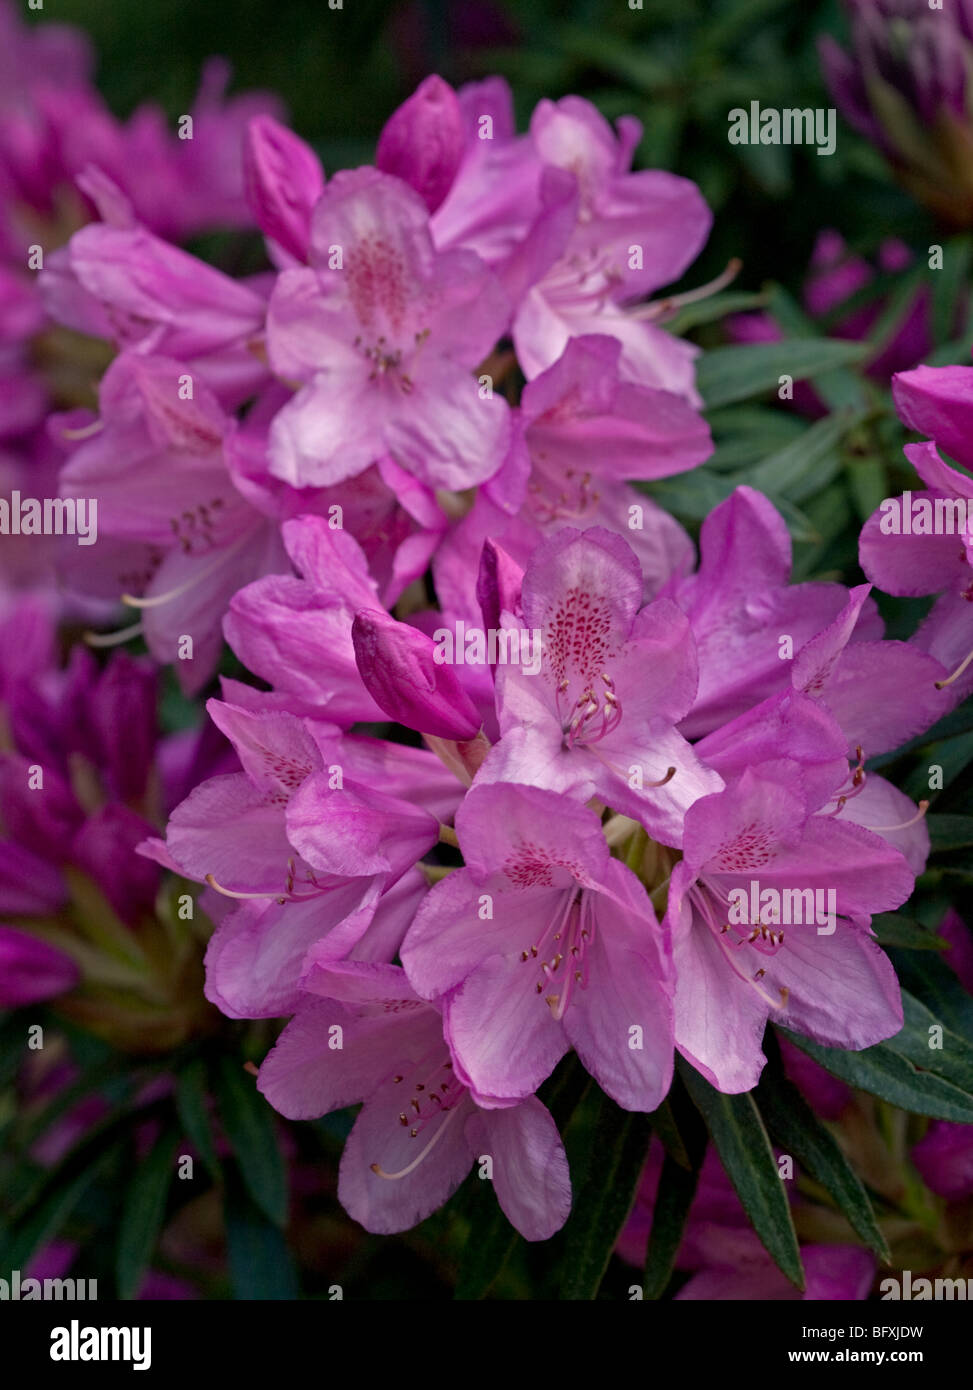 Rhododendron Hampshire Bell Stock Photo